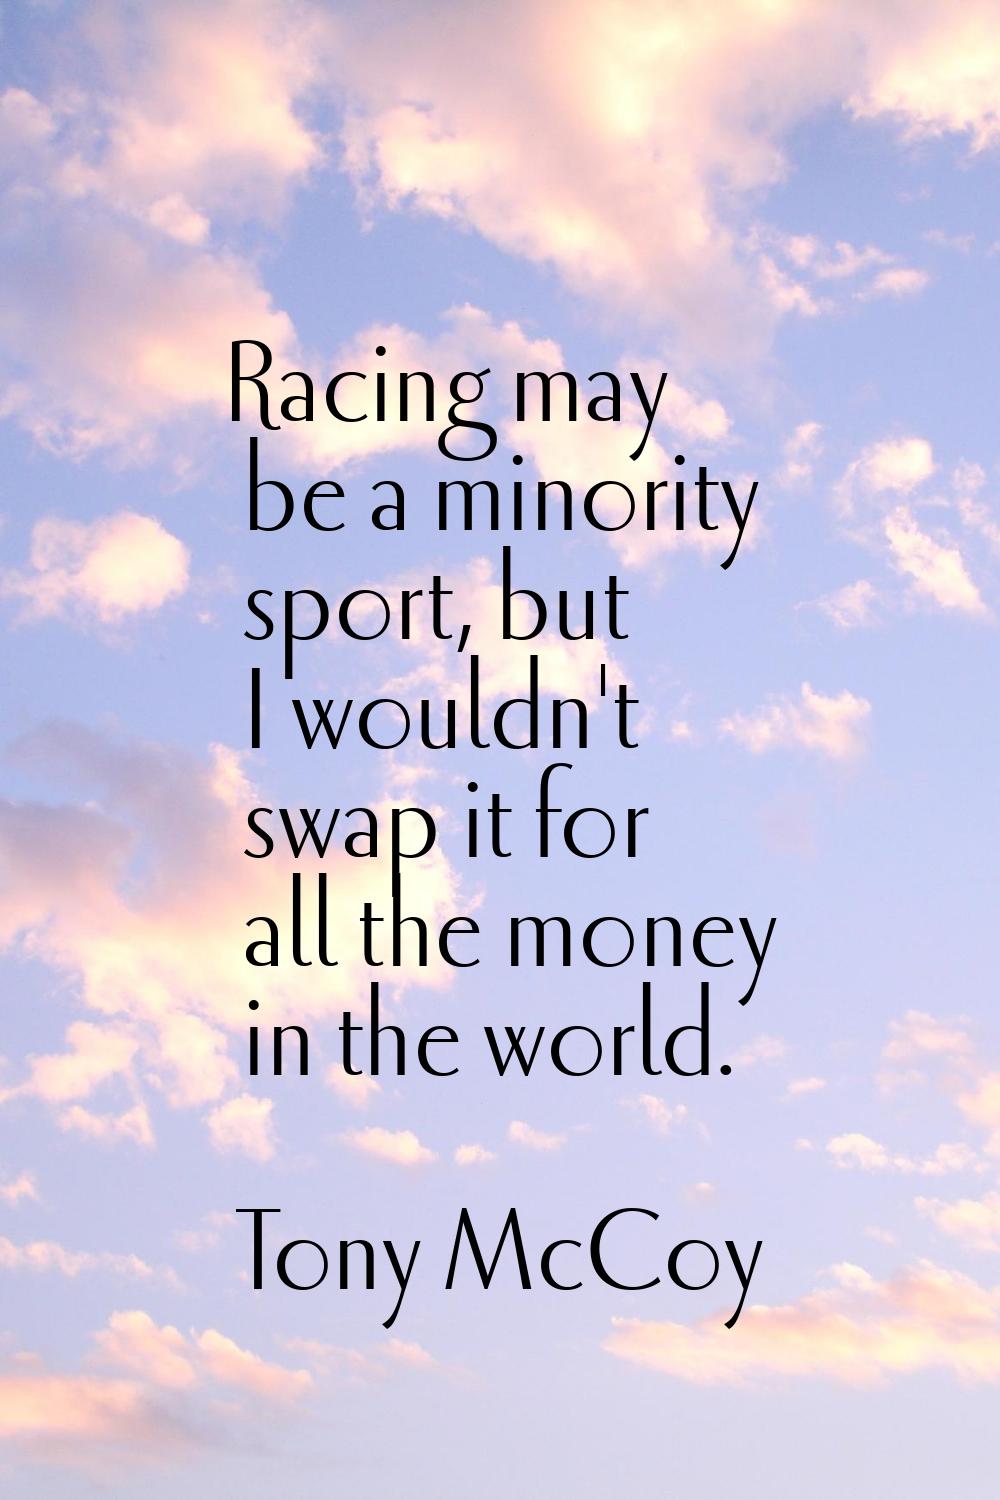 Racing may be a minority sport, but I wouldn't swap it for all the money in the world.